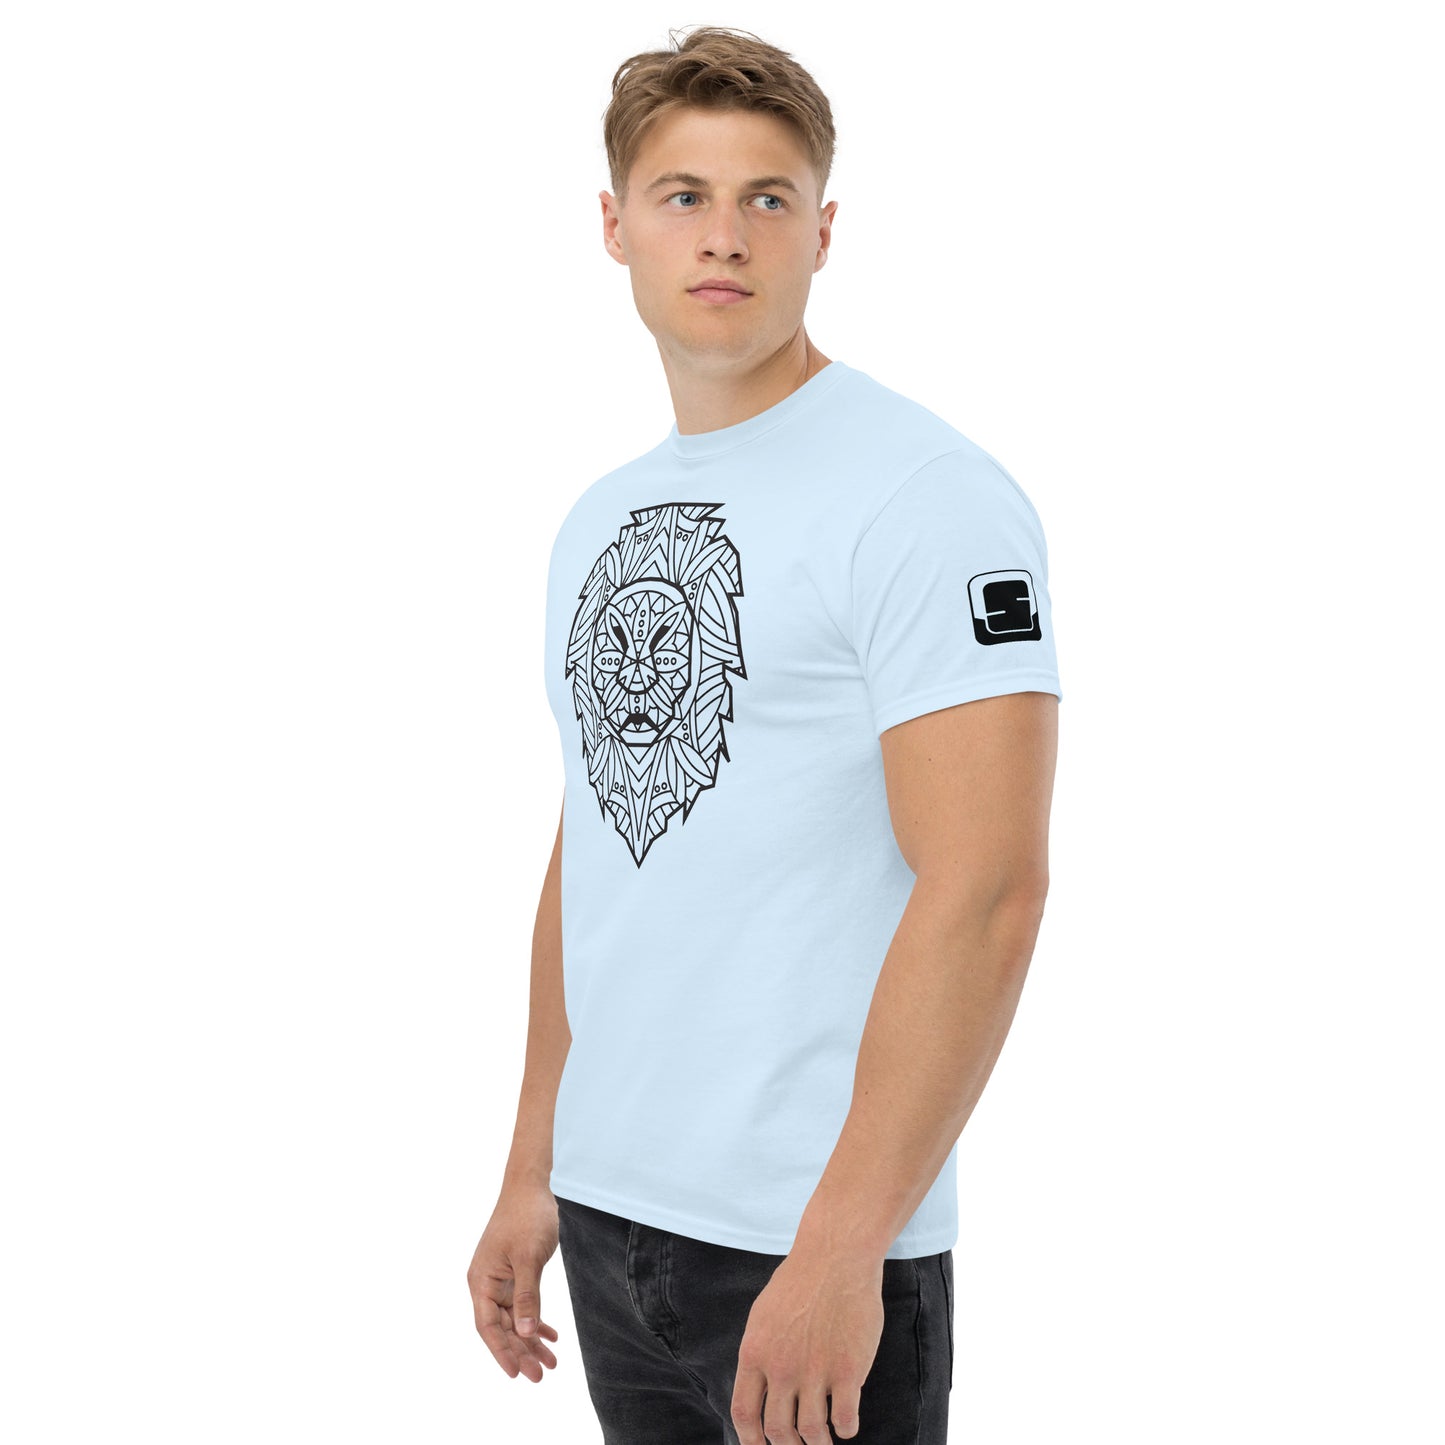 Young man with a focused gaze wearing a light blue t-shirt with a large black geometric lion head design on the chest and a small square logo patch on the sleeve, standing against a white background.